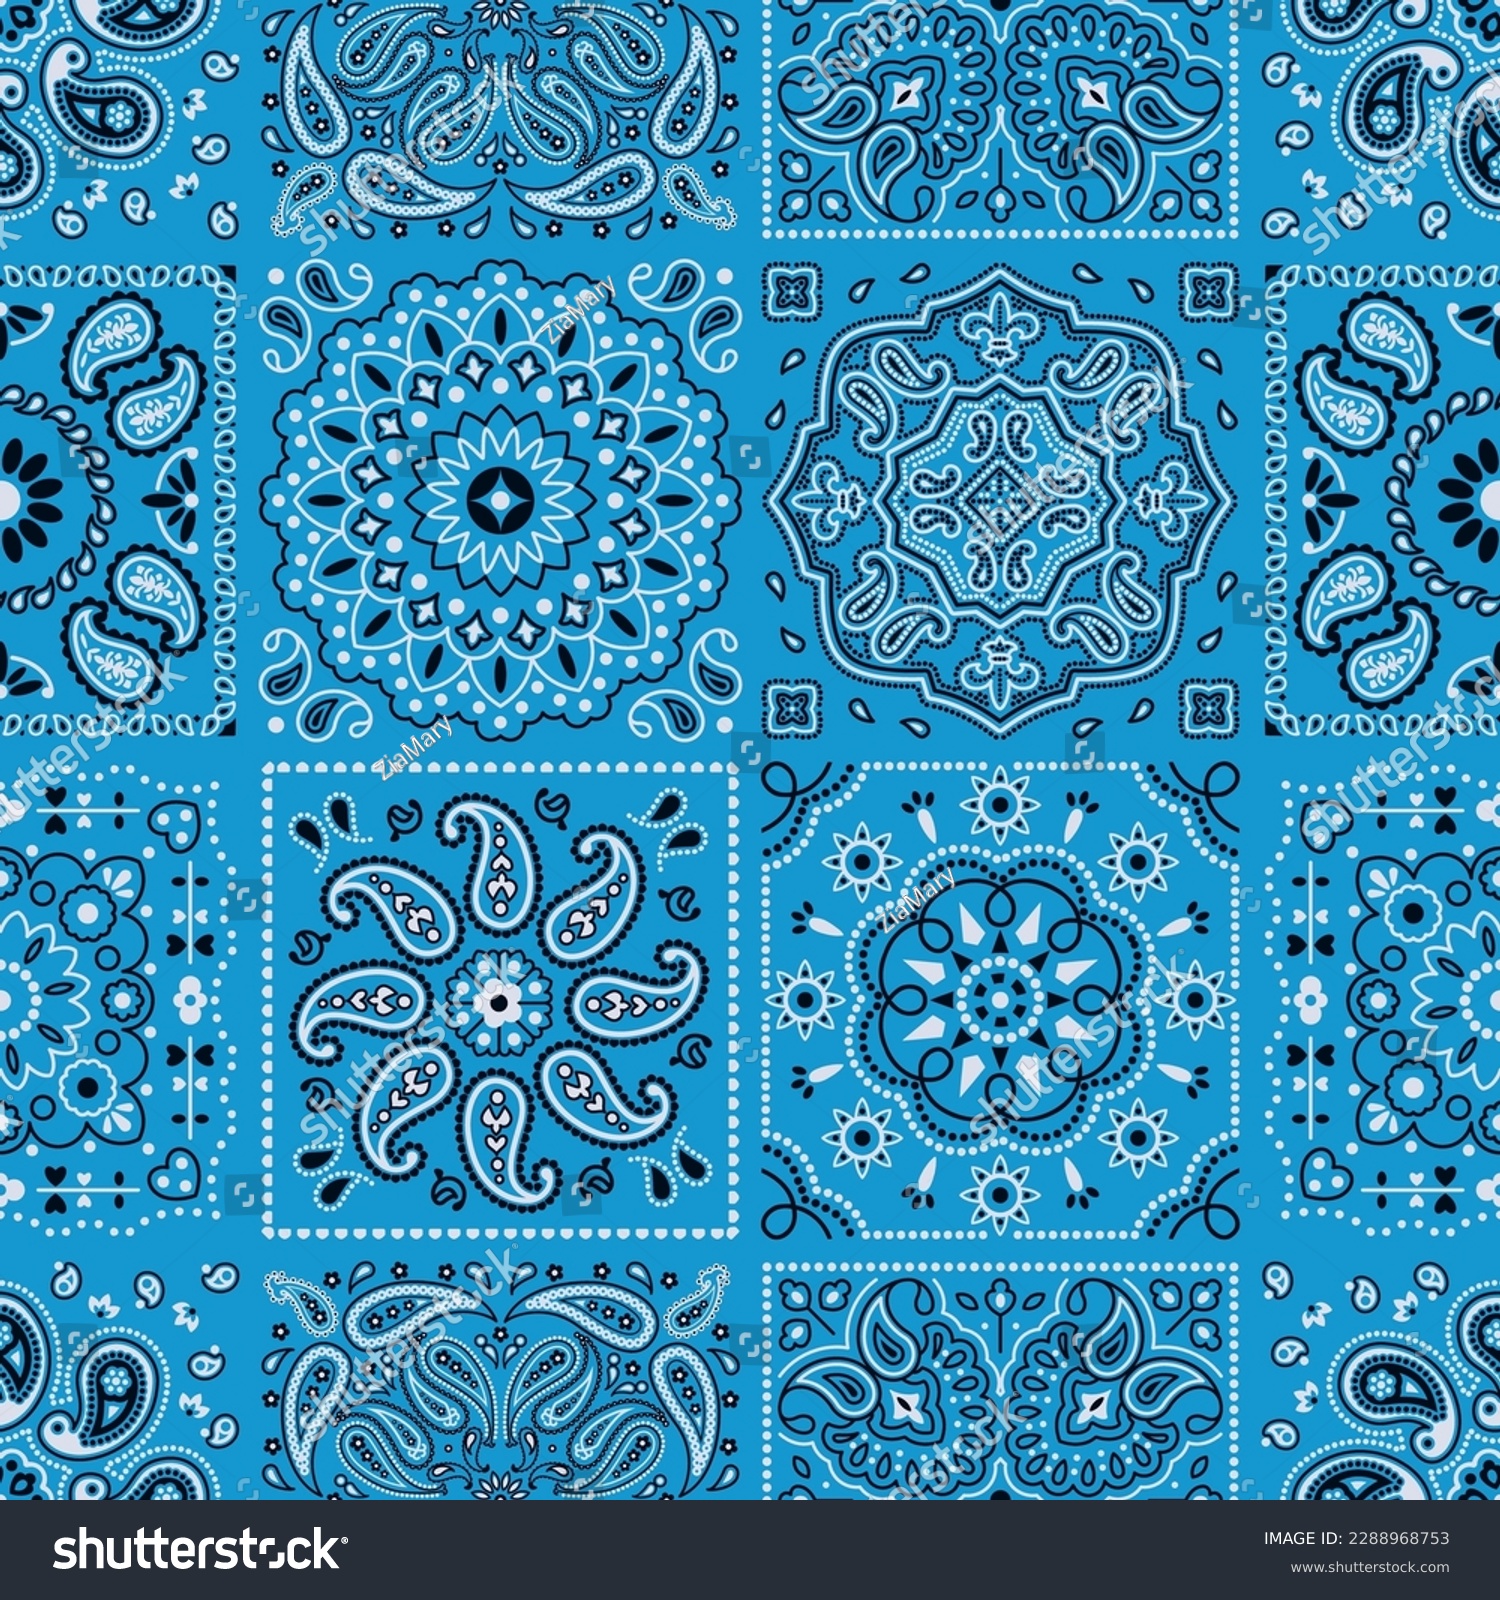 SVG of Blue Paisley fabric tiles patchwork wallpaper vintage vector seamless pattern svg